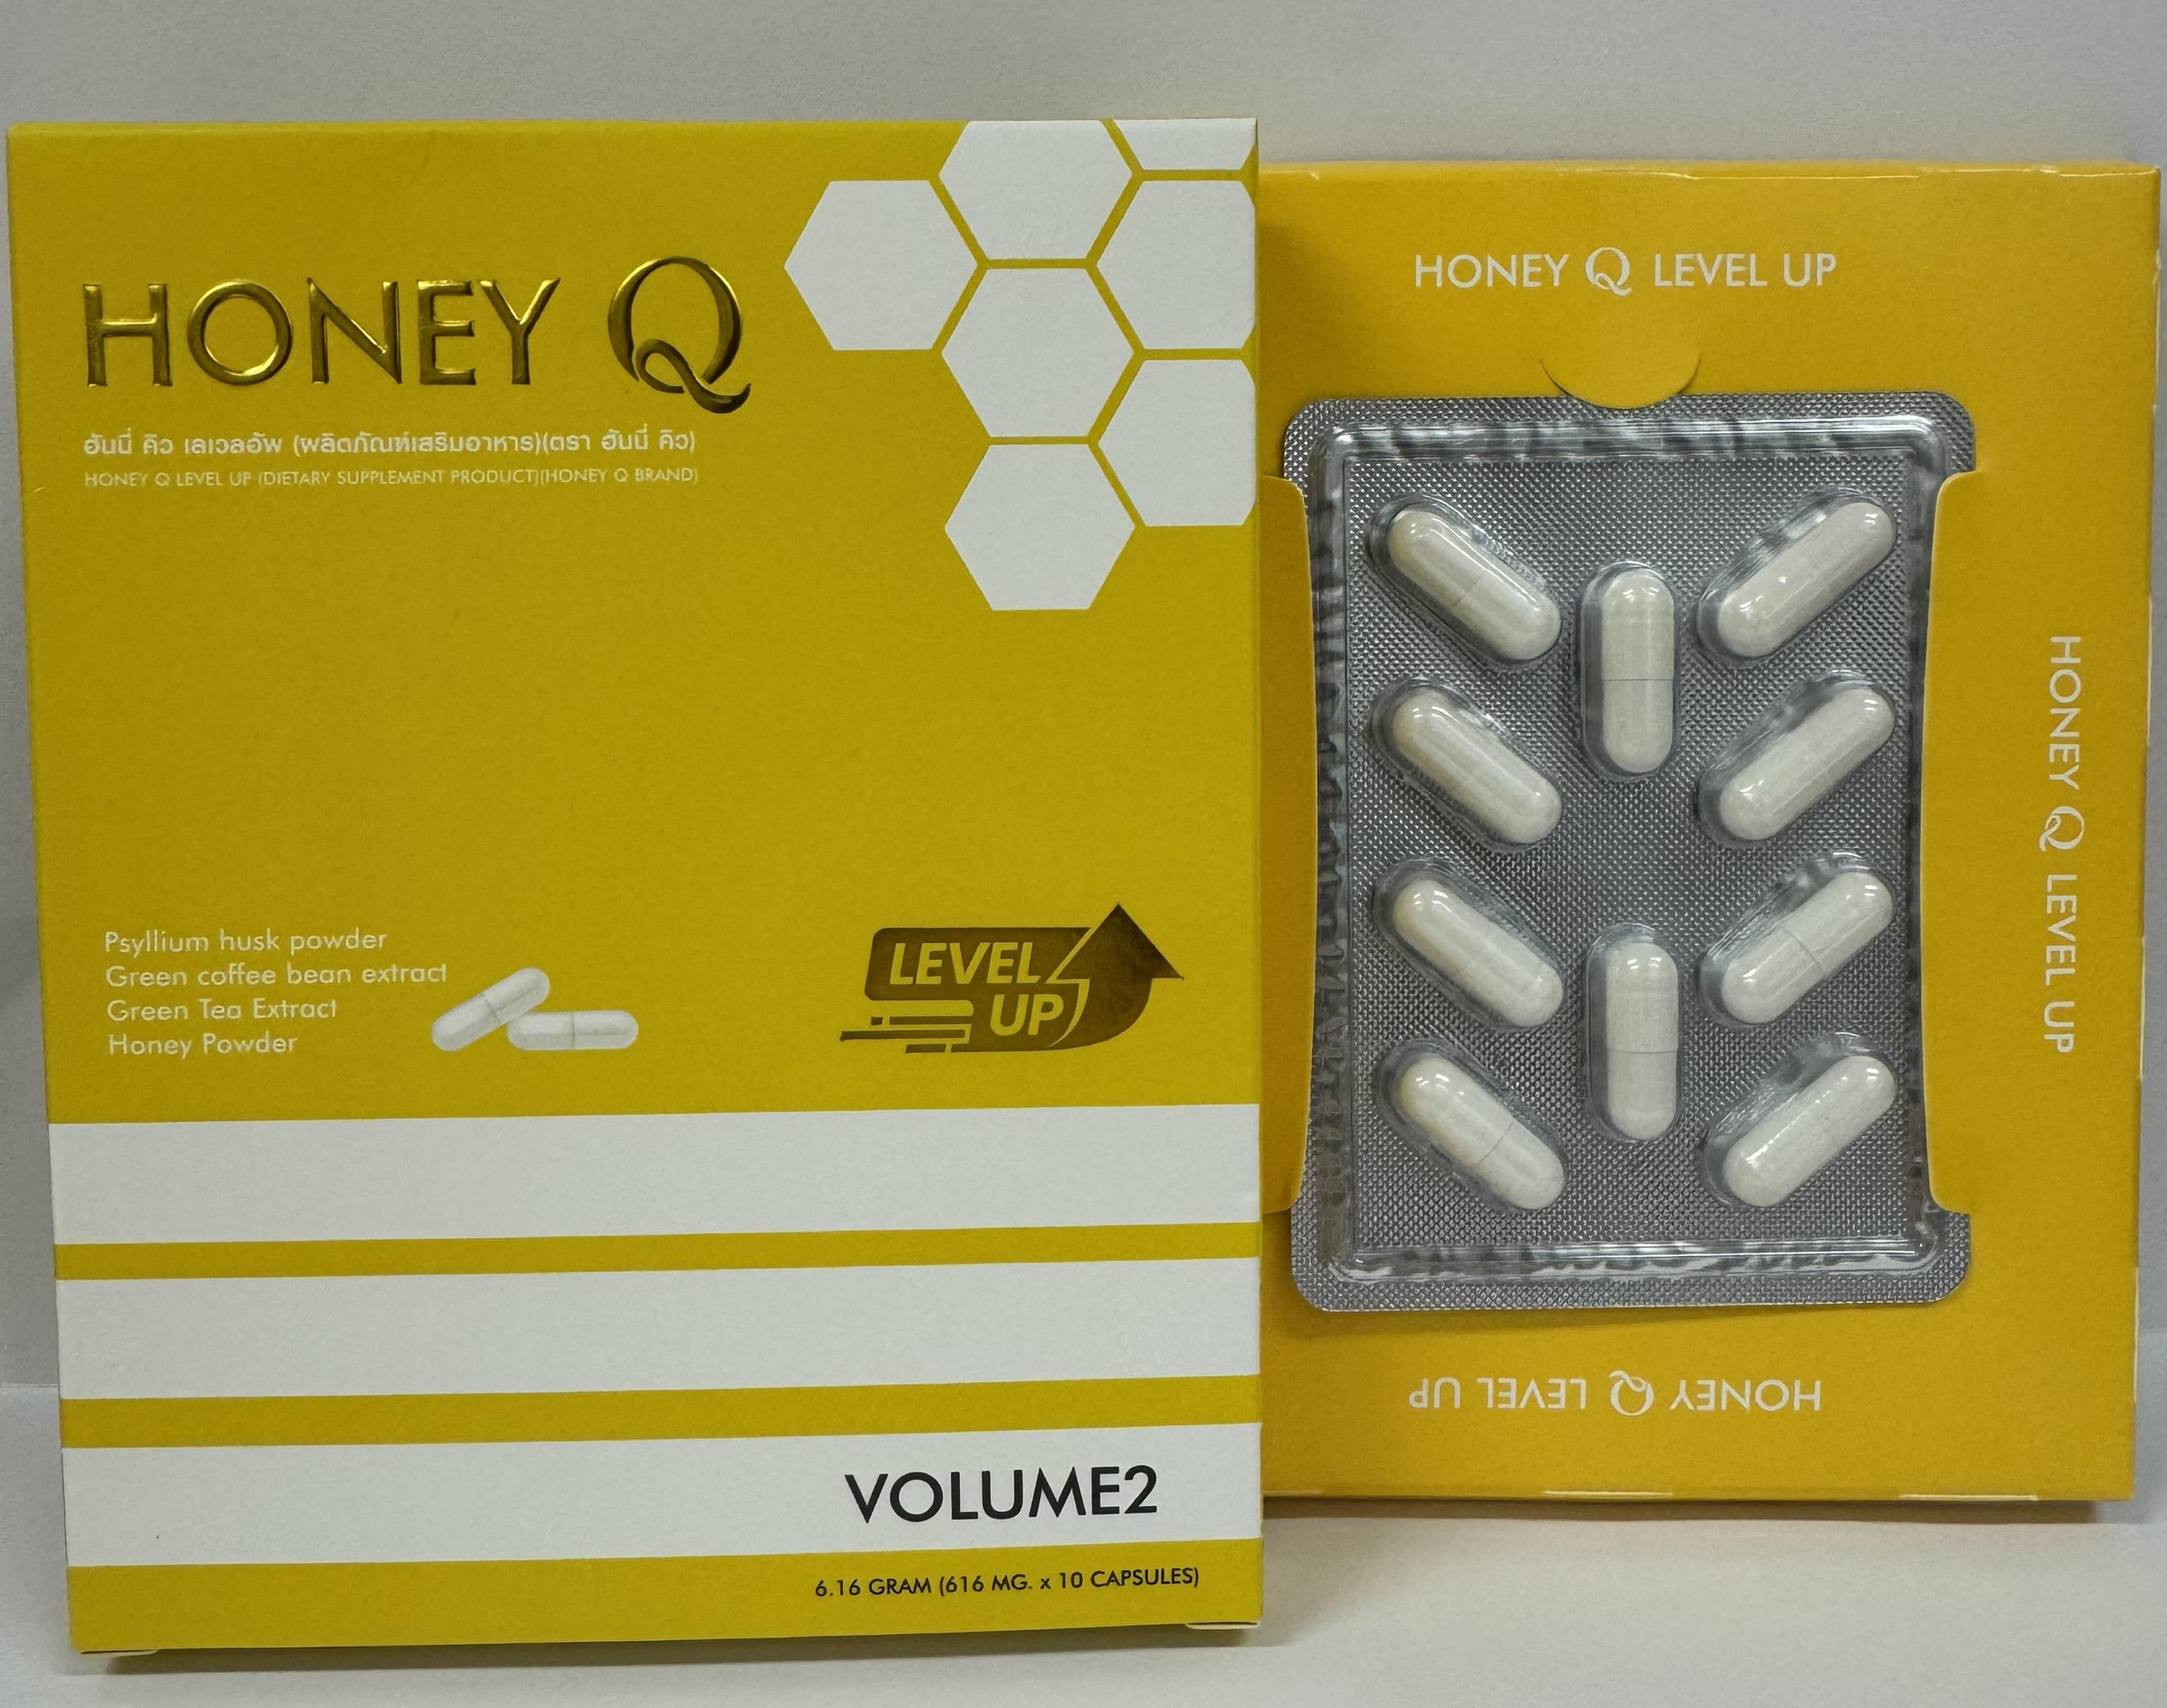 The Department of Health today (April 16) appealed to the public not to buy or consume a slimming product, namely Honey Q Level Up, as it was found to contain undeclared controlled and banned drug ingredients. Photo shows the aforementioned slimming product.